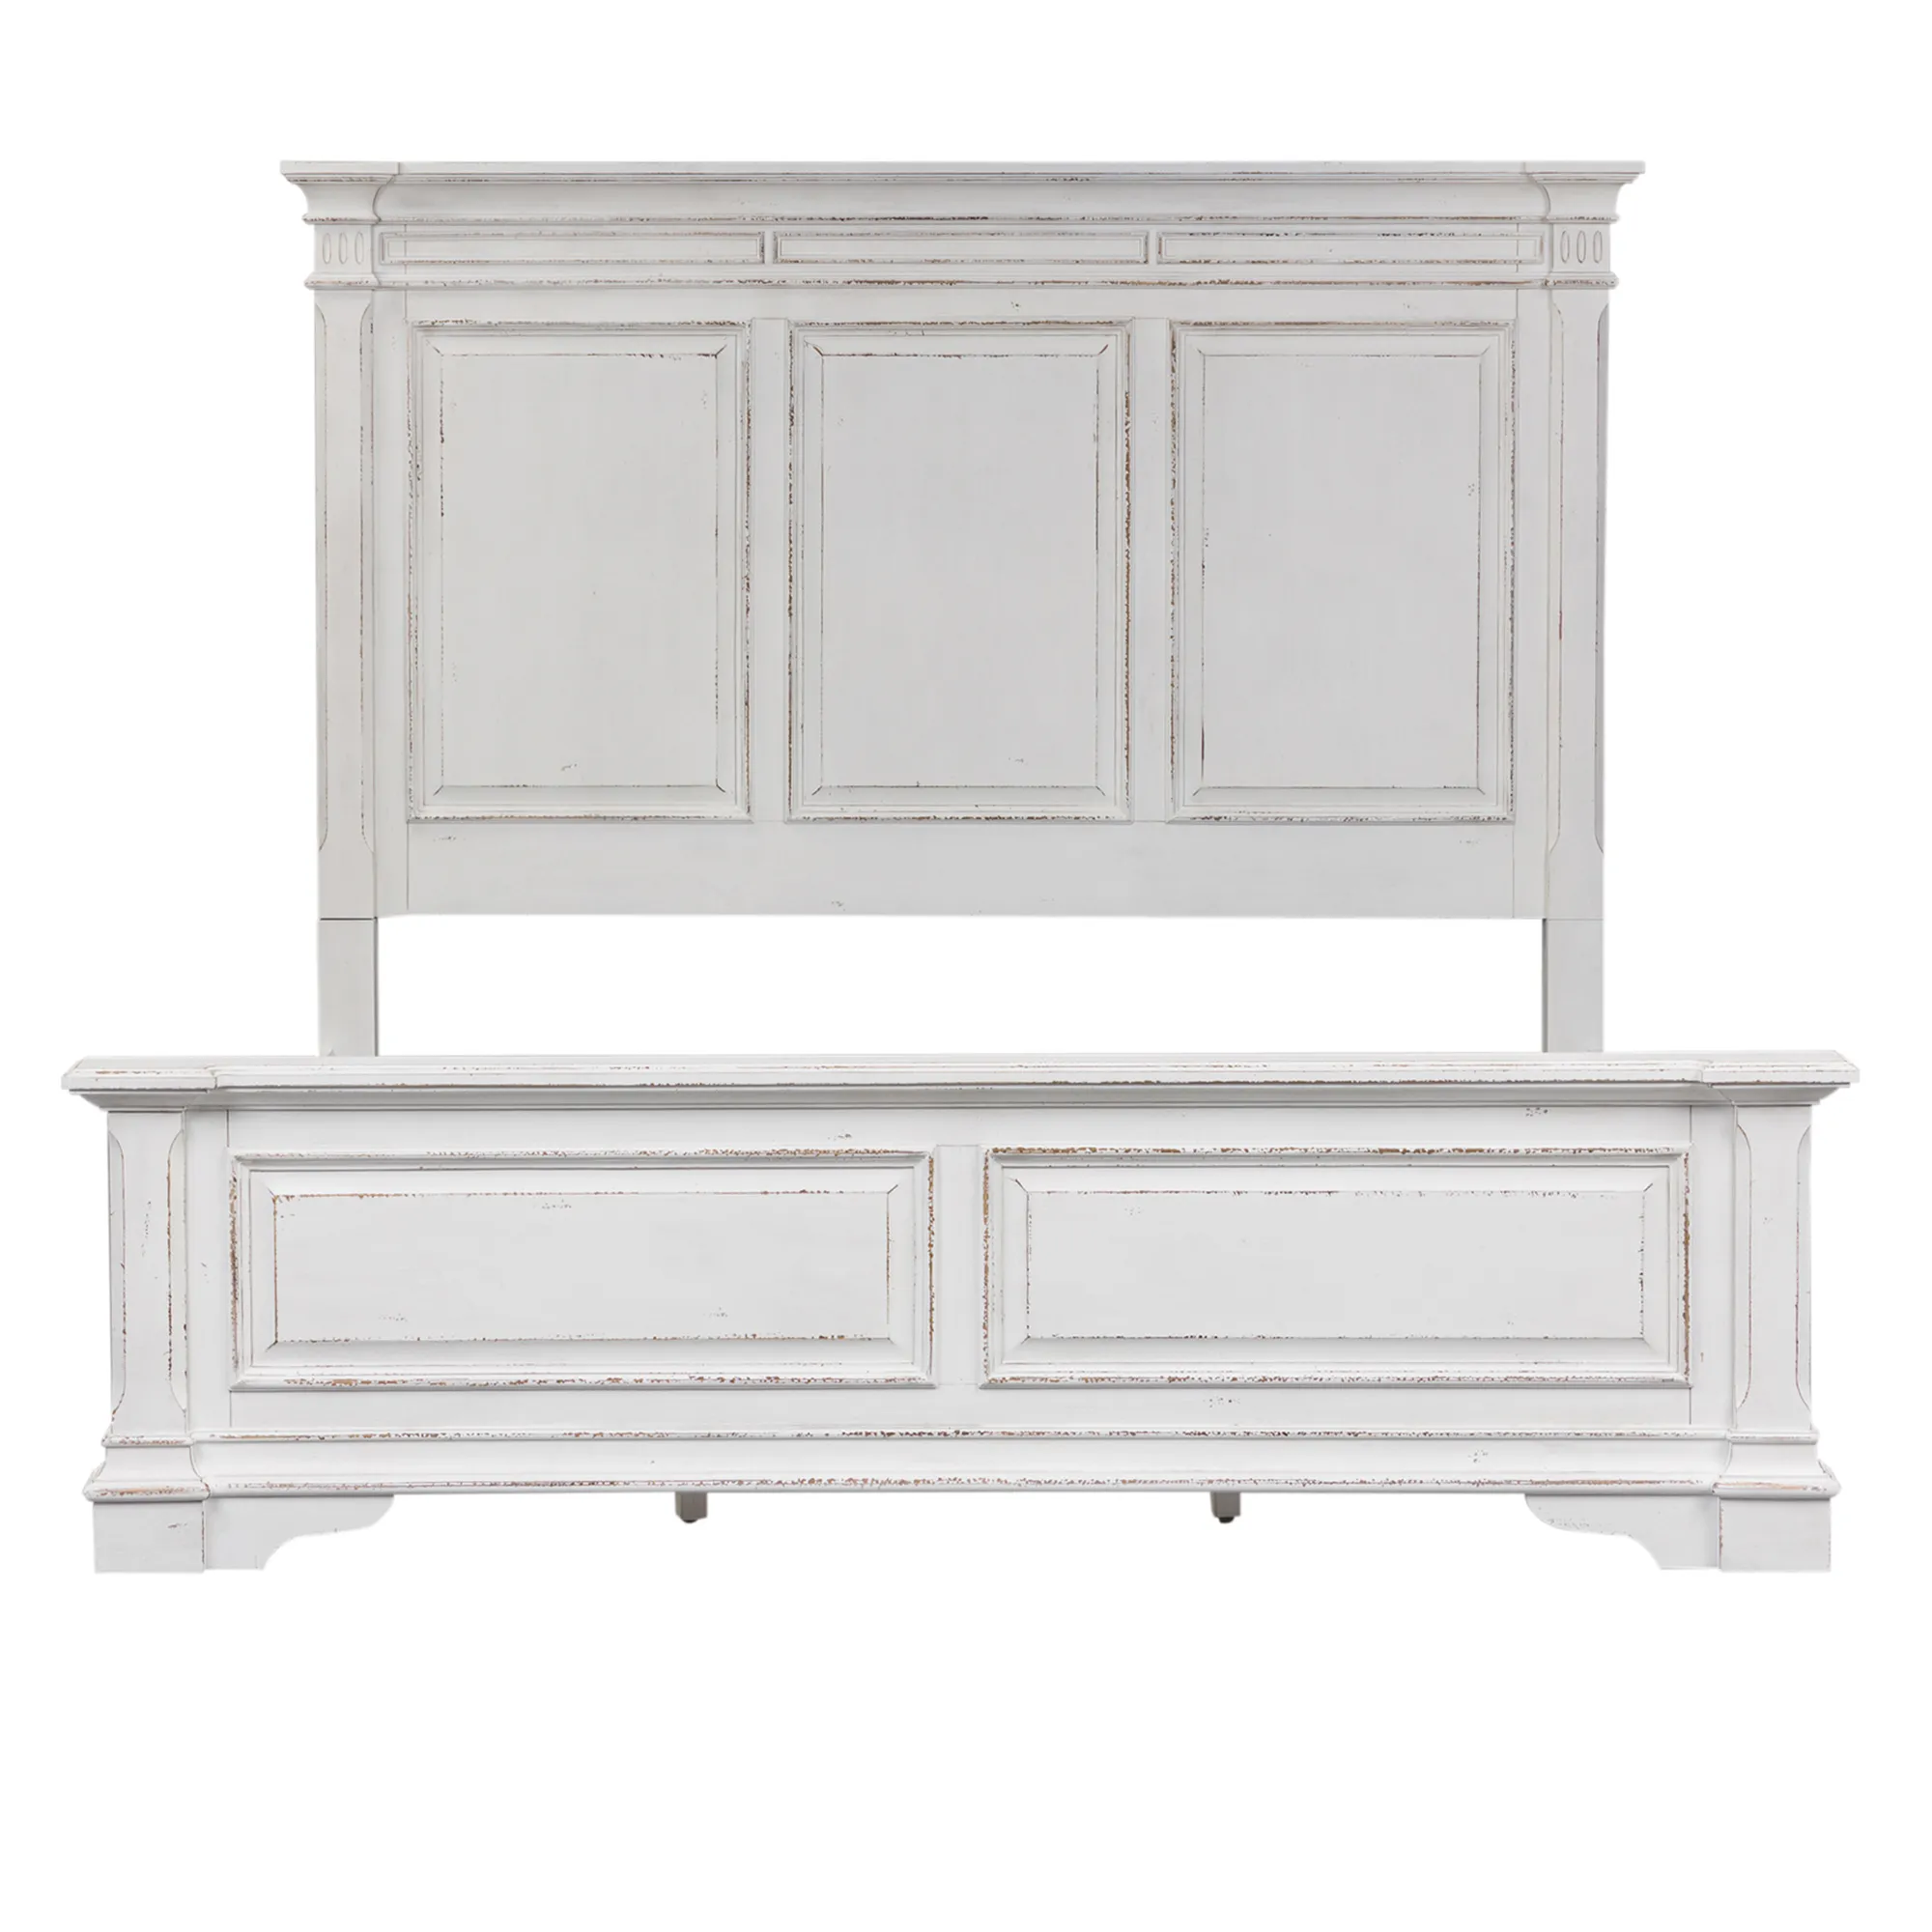 KING CALIFORNIA PANEL BED DRESSER & MIRROR NIGHT STAND - ABBEY PARK